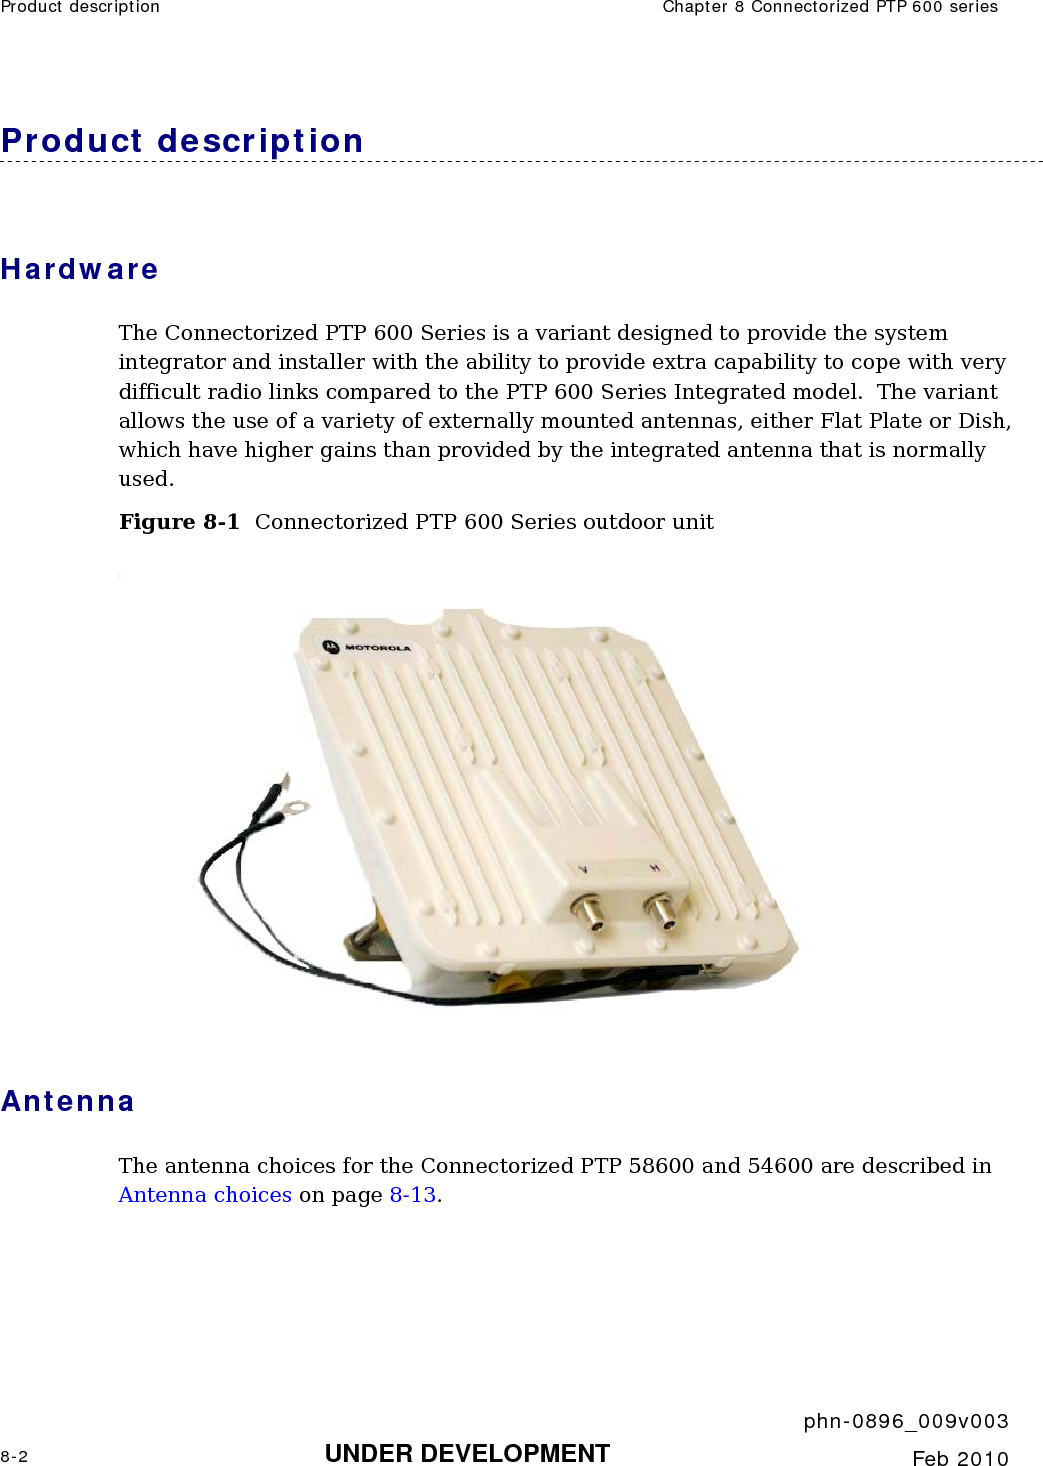 Product description  Chapter 8 Connectorized PTP 600 series     phn-0896_009v003 8-2 UNDER DEVELOPMENT  Feb 2010  Product description Hardware The Connectorized PTP 600 Series is a variant designed to provide the system integrator and installer with the ability to provide extra capability to cope with very difficult radio links compared to the PTP 600 Series Integrated model.  The variant allows the use of a variety of externally mounted antennas, either Flat Plate or Dish, which have higher gains than provided by the integrated antenna that is normally used. Figure 8-1  Connectorized PTP 600 Series outdoor unit  Antenna The antenna choices for the Connectorized PTP 58600 and 54600 are described in Antenna choices on page 8-13. 